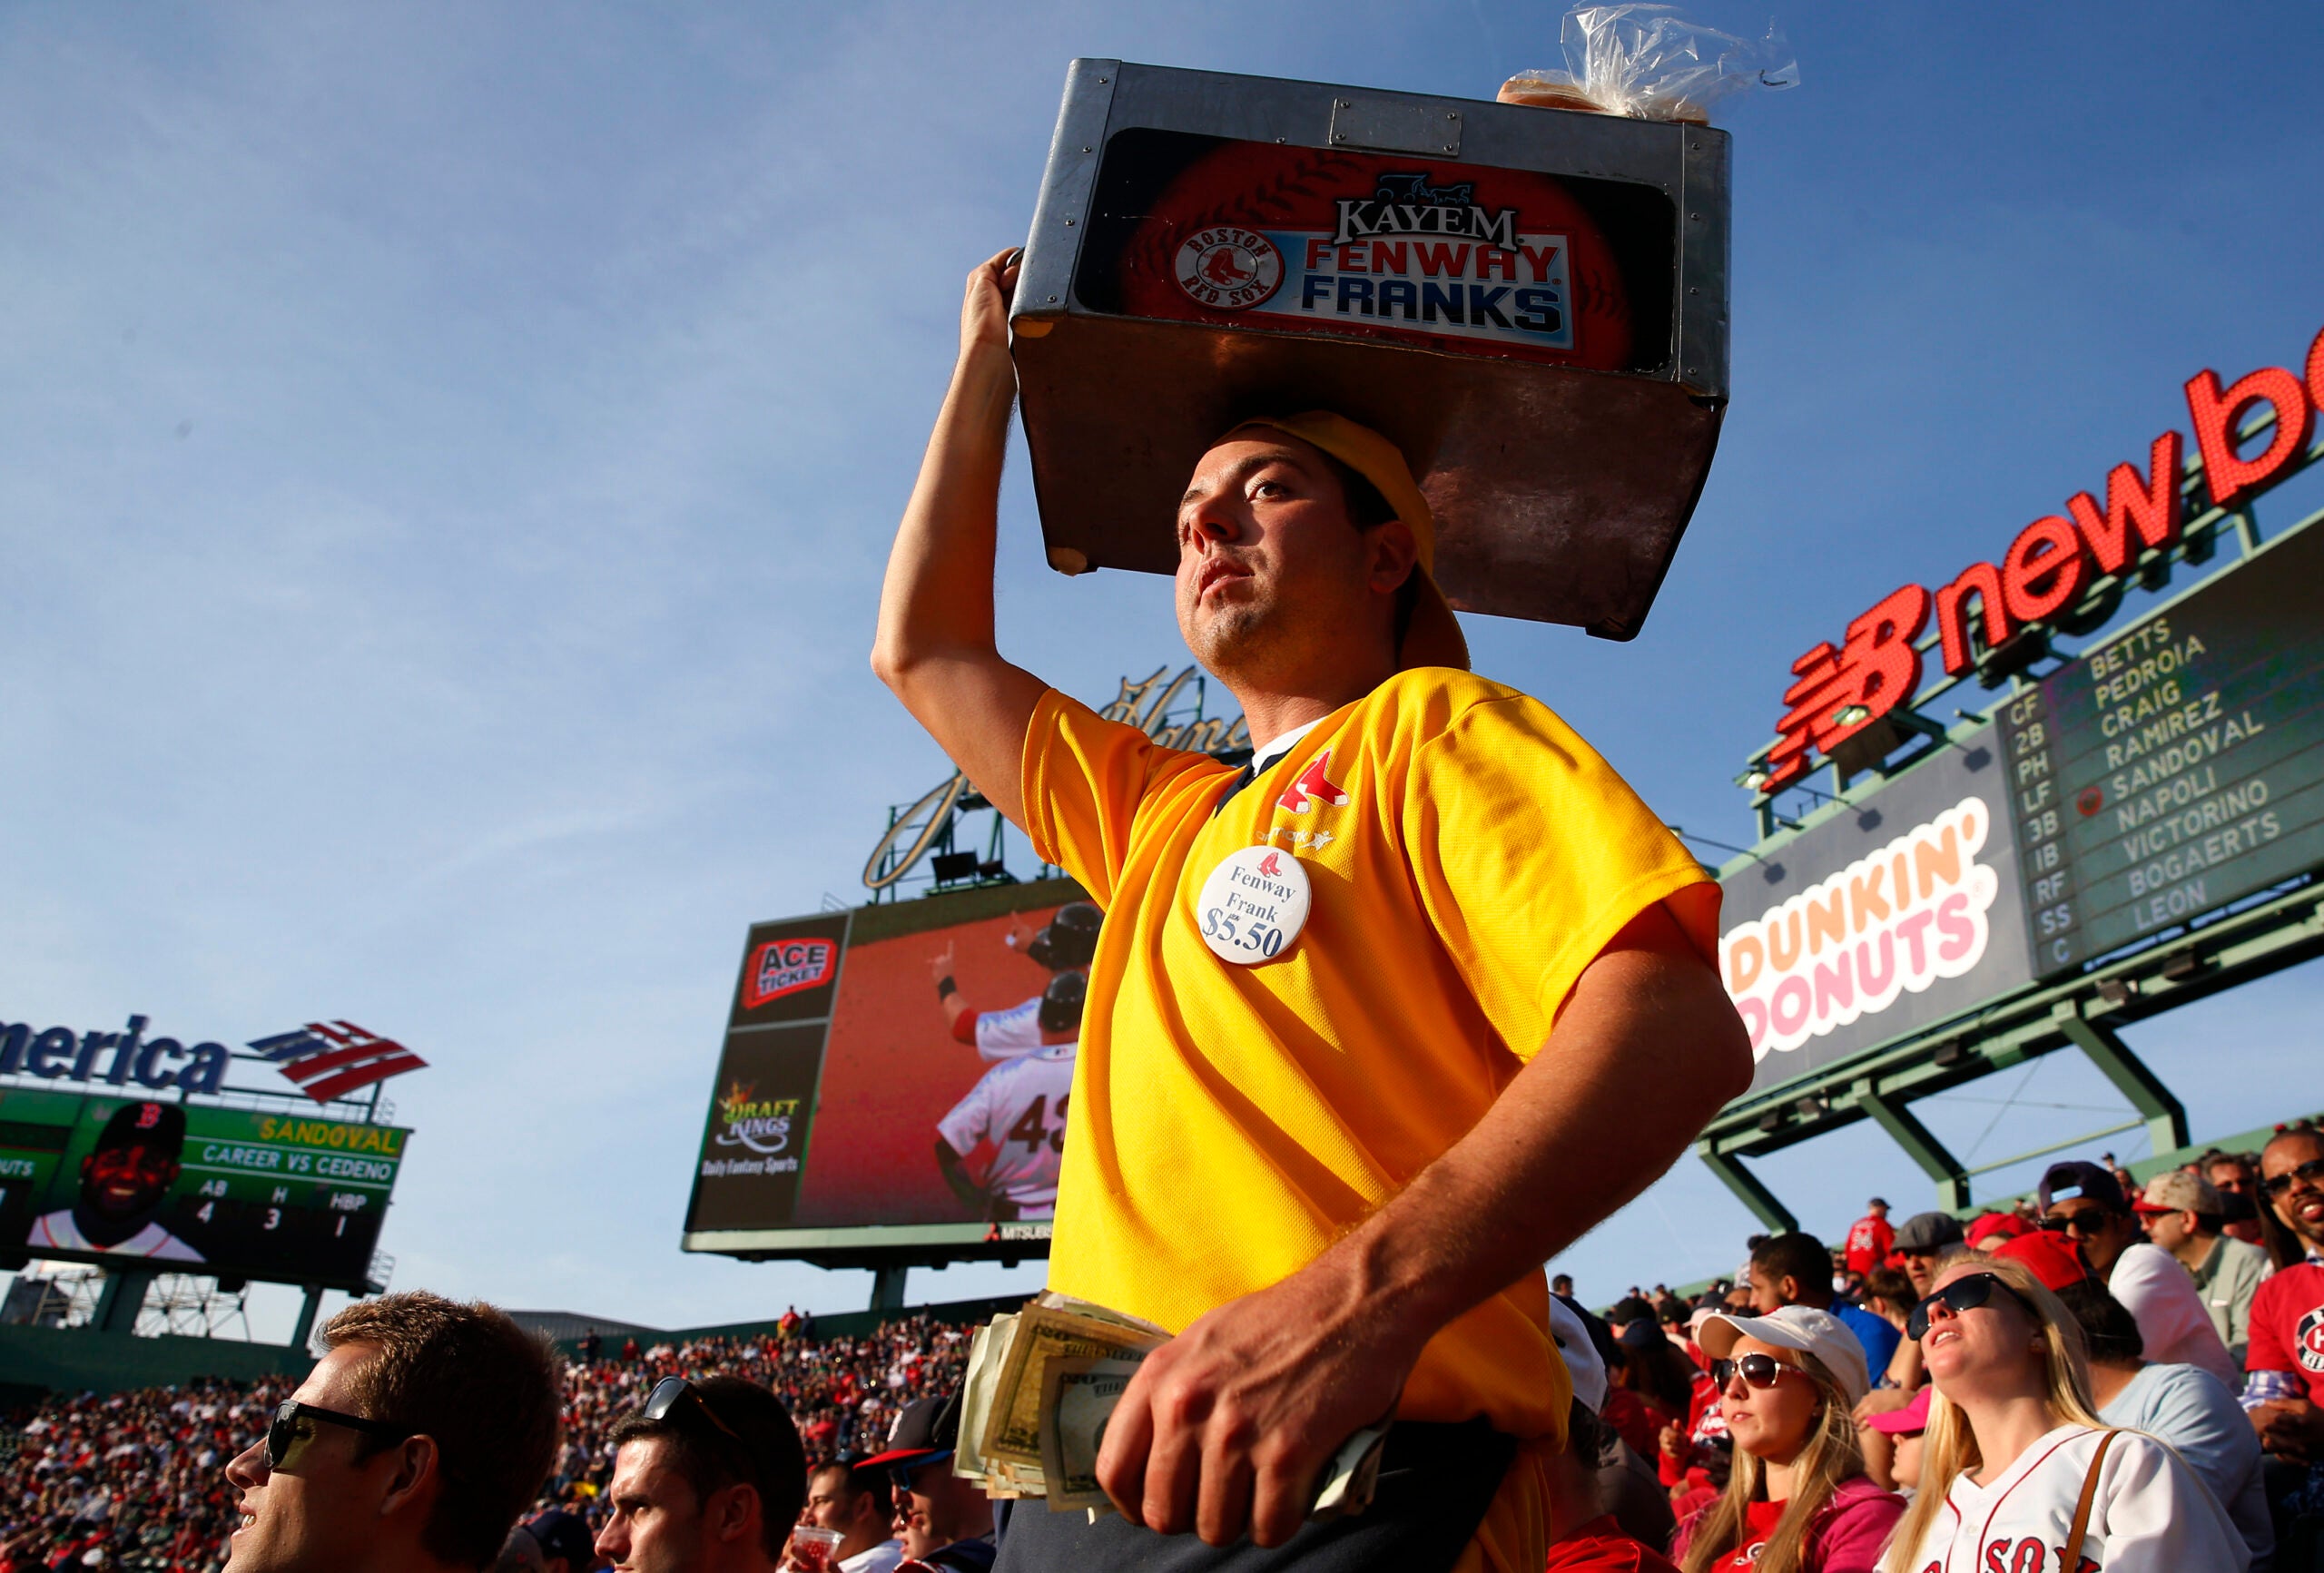 Hot dog economics: How and why Fenway Park vendors pick where to